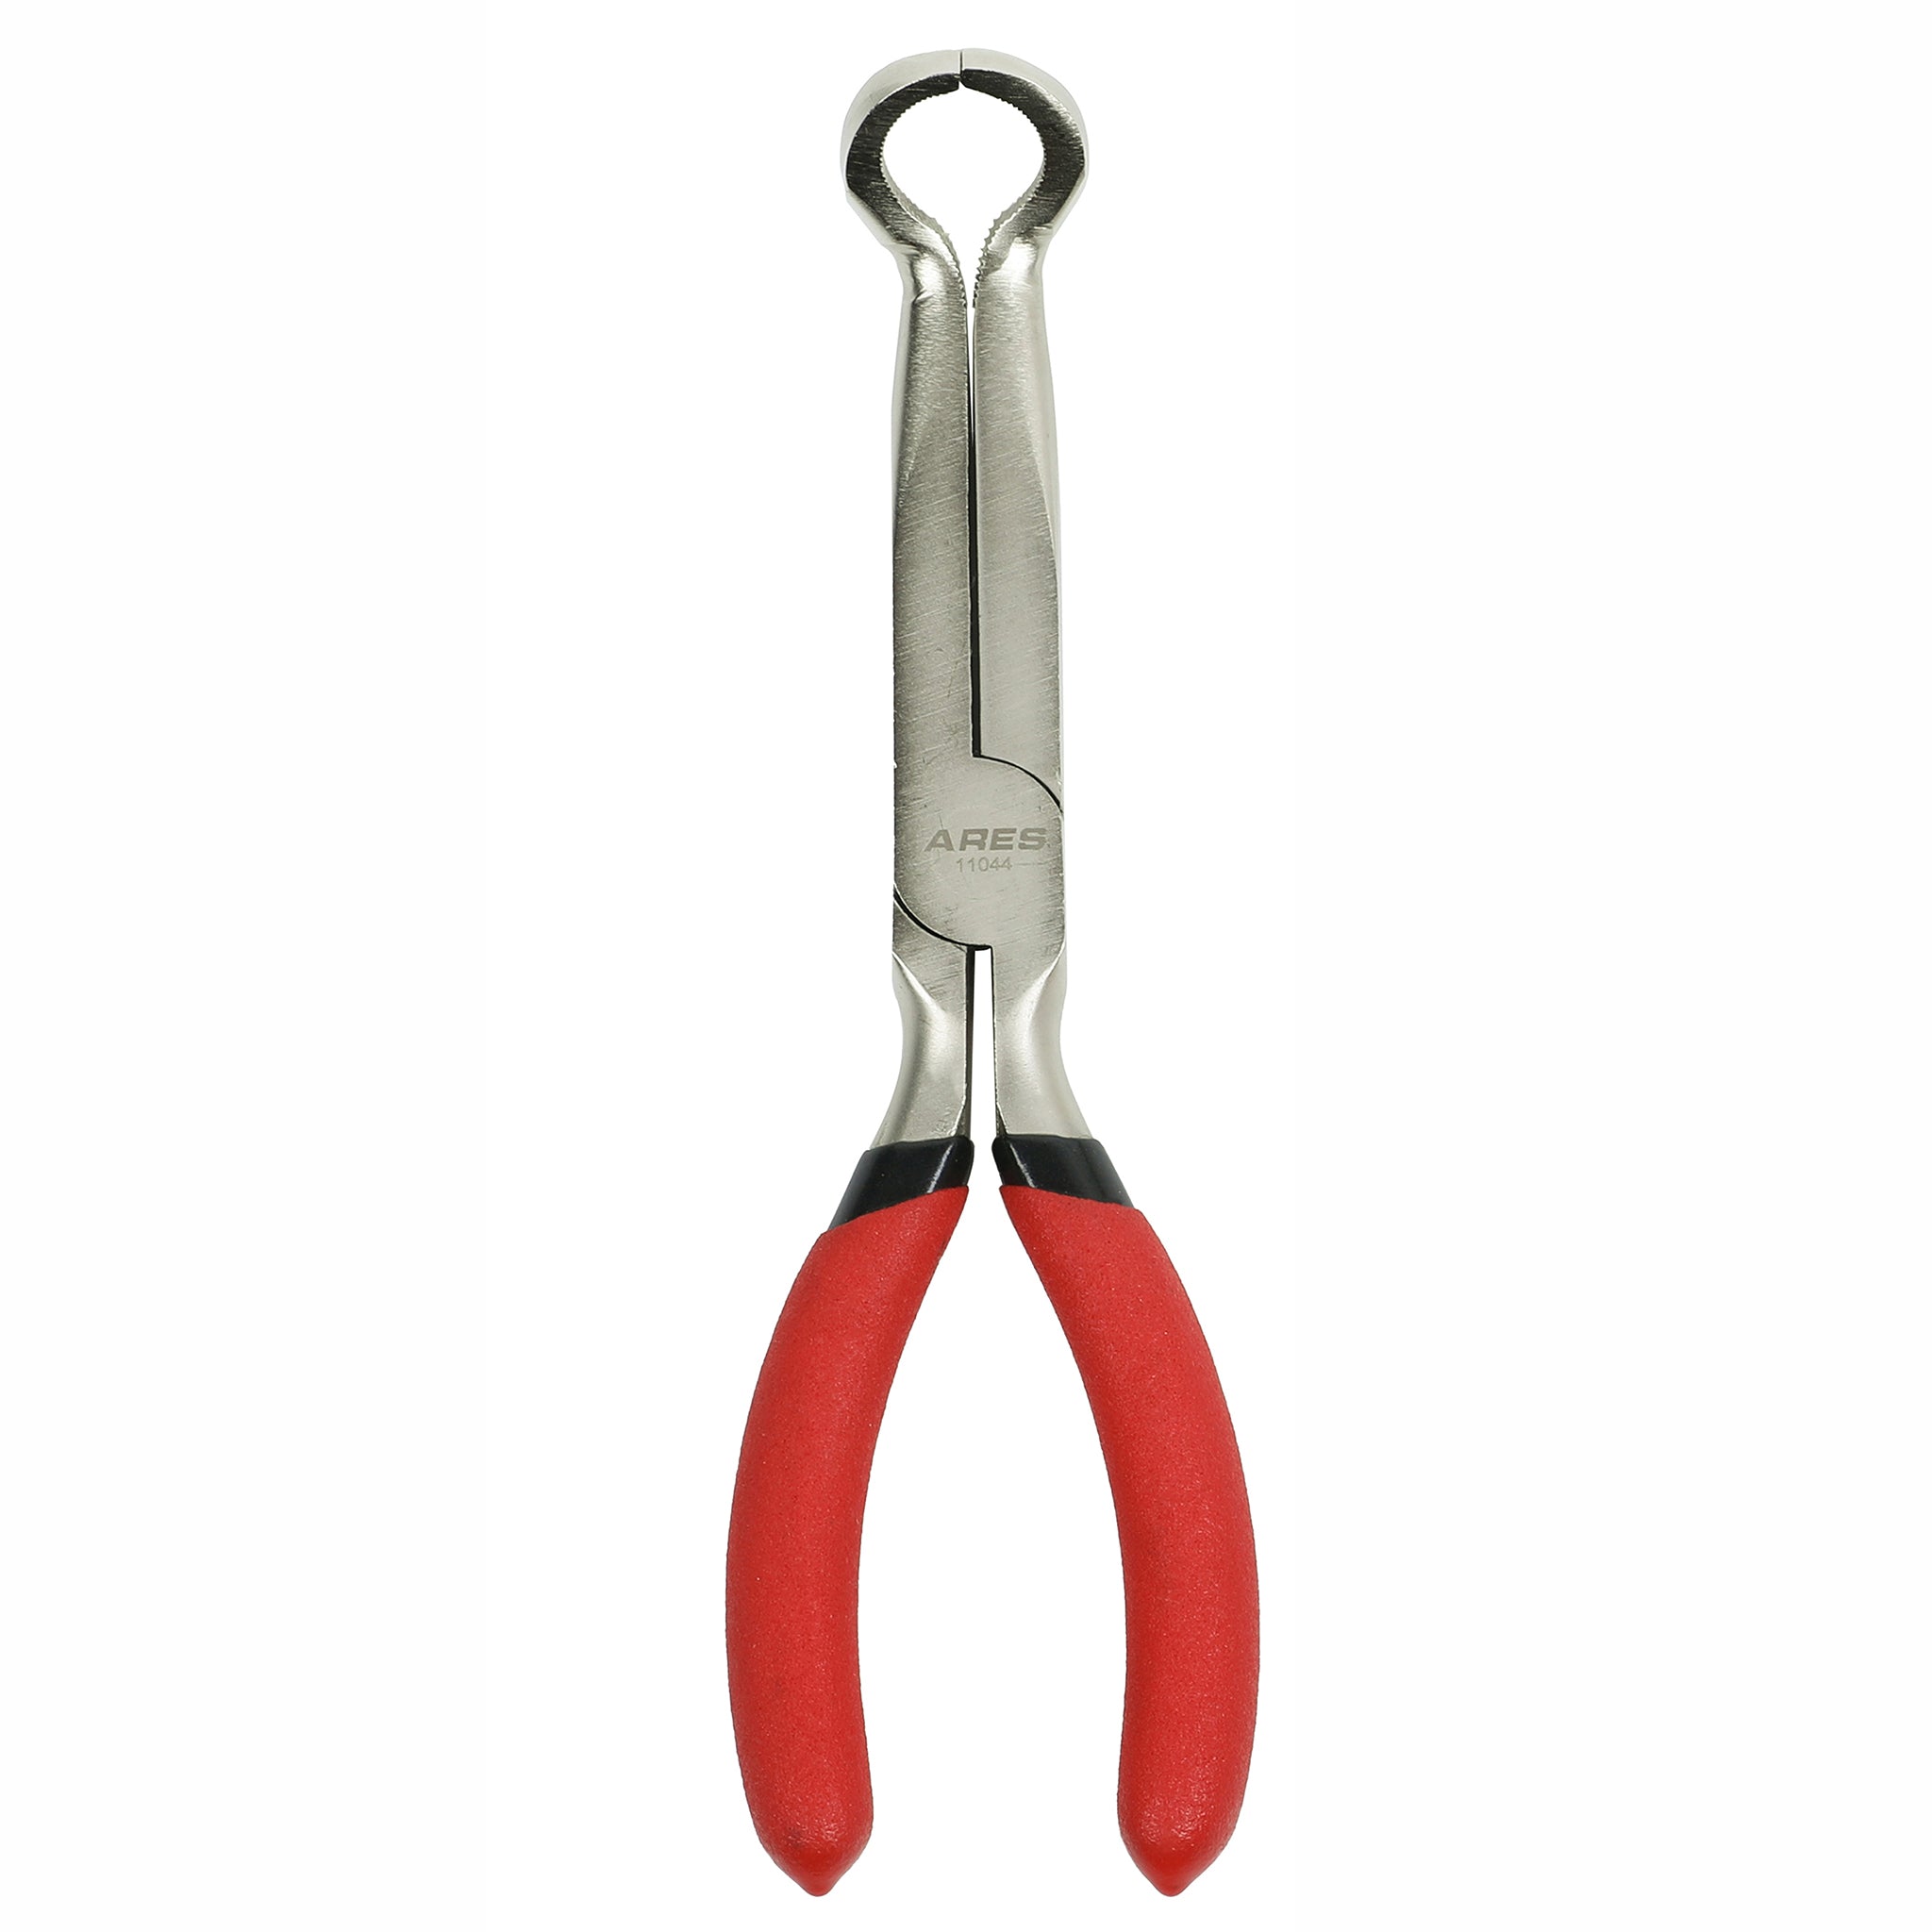 51410 Offset Spark Plug Boot Removal Pliers